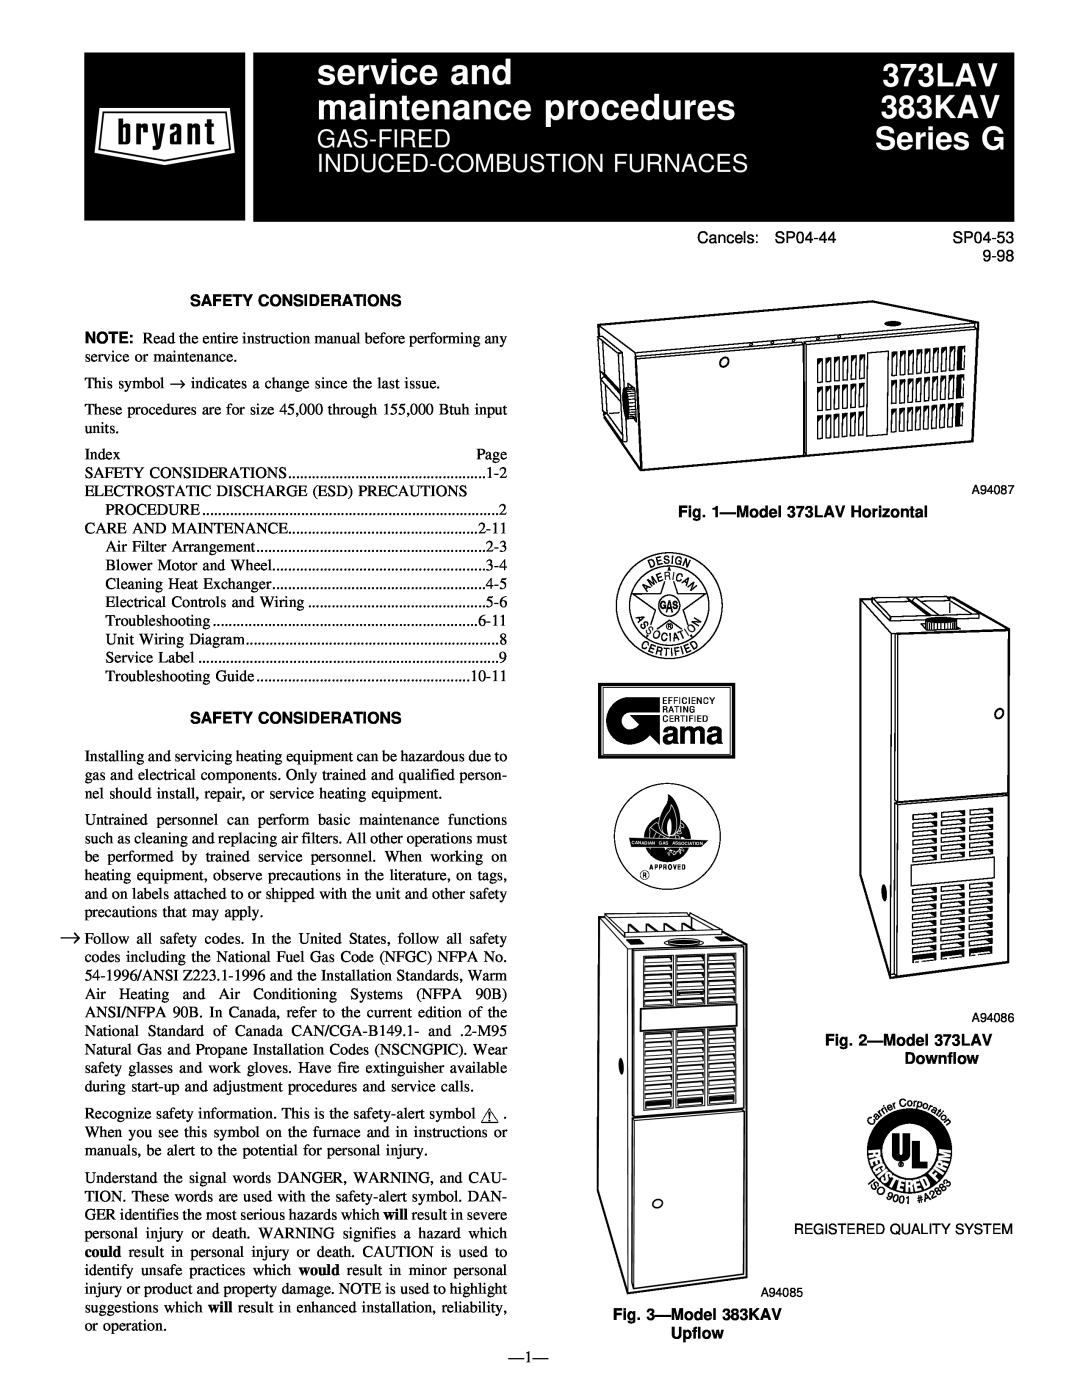 Bryant 373LAV manual Note To Installer, This manual must be left with the equipment user, Upﬂow, User’S Information Manual 